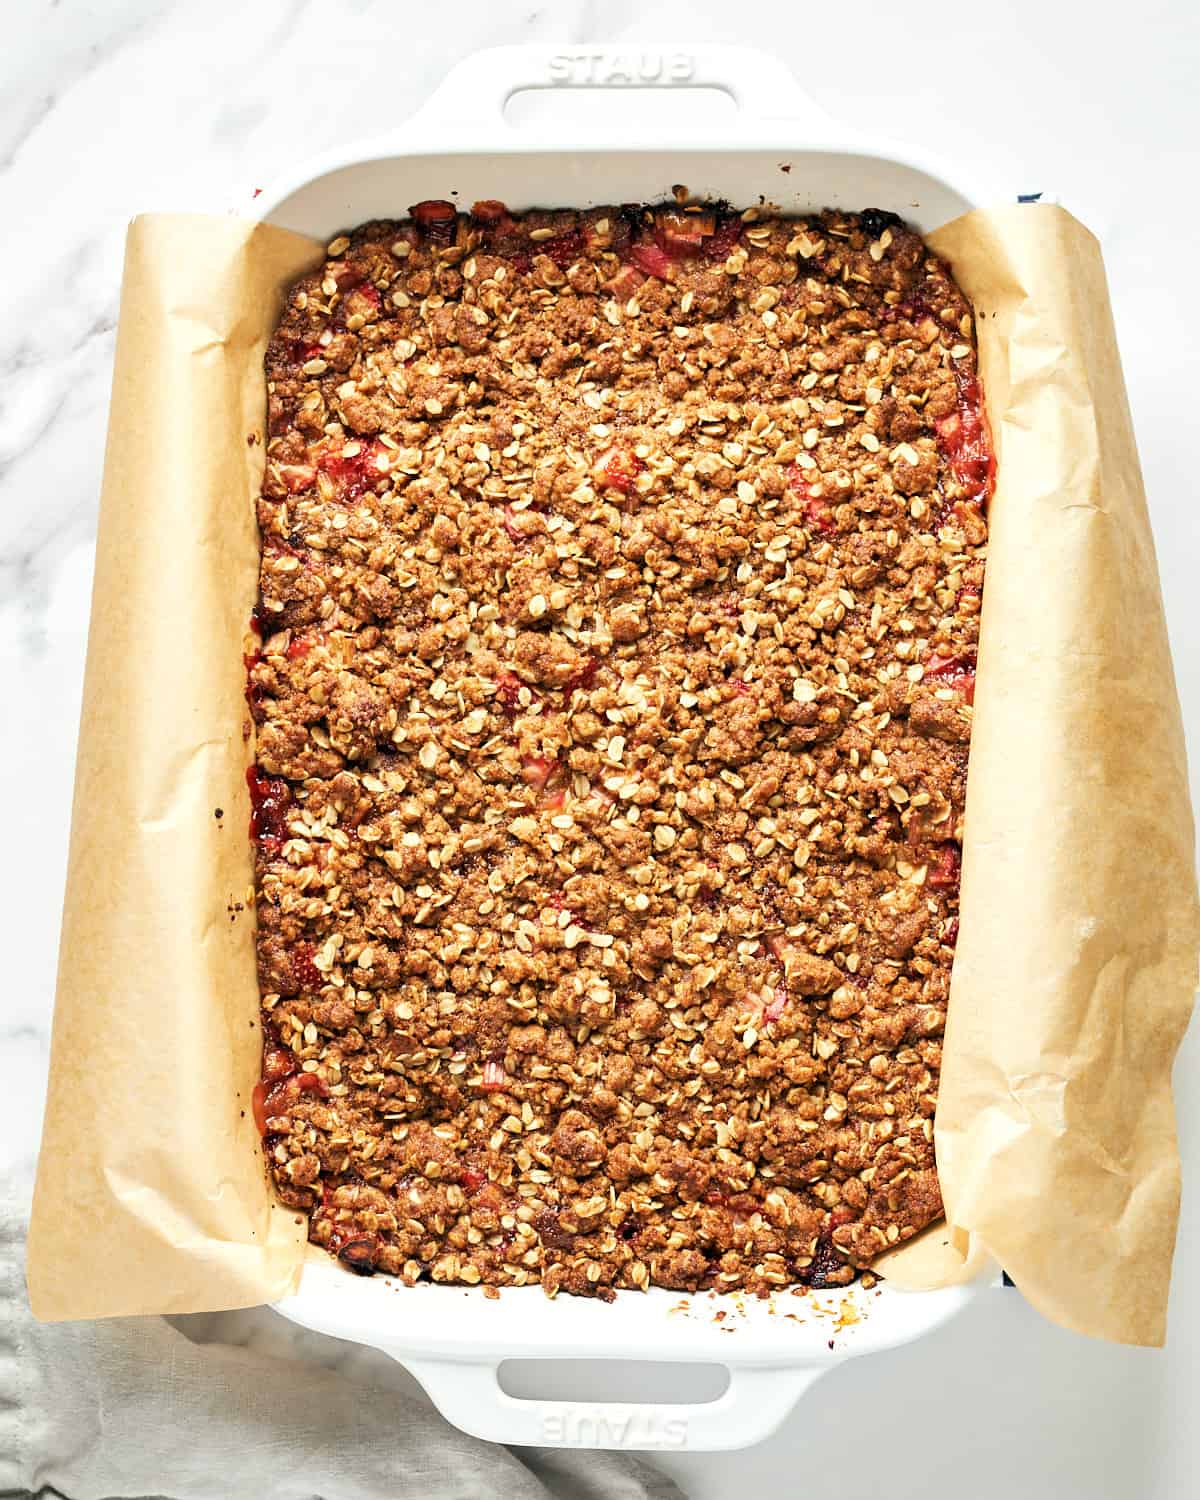 Overhead view of baked Vegan Strawberry Rhubarb Crumble Bars on a marble surface.